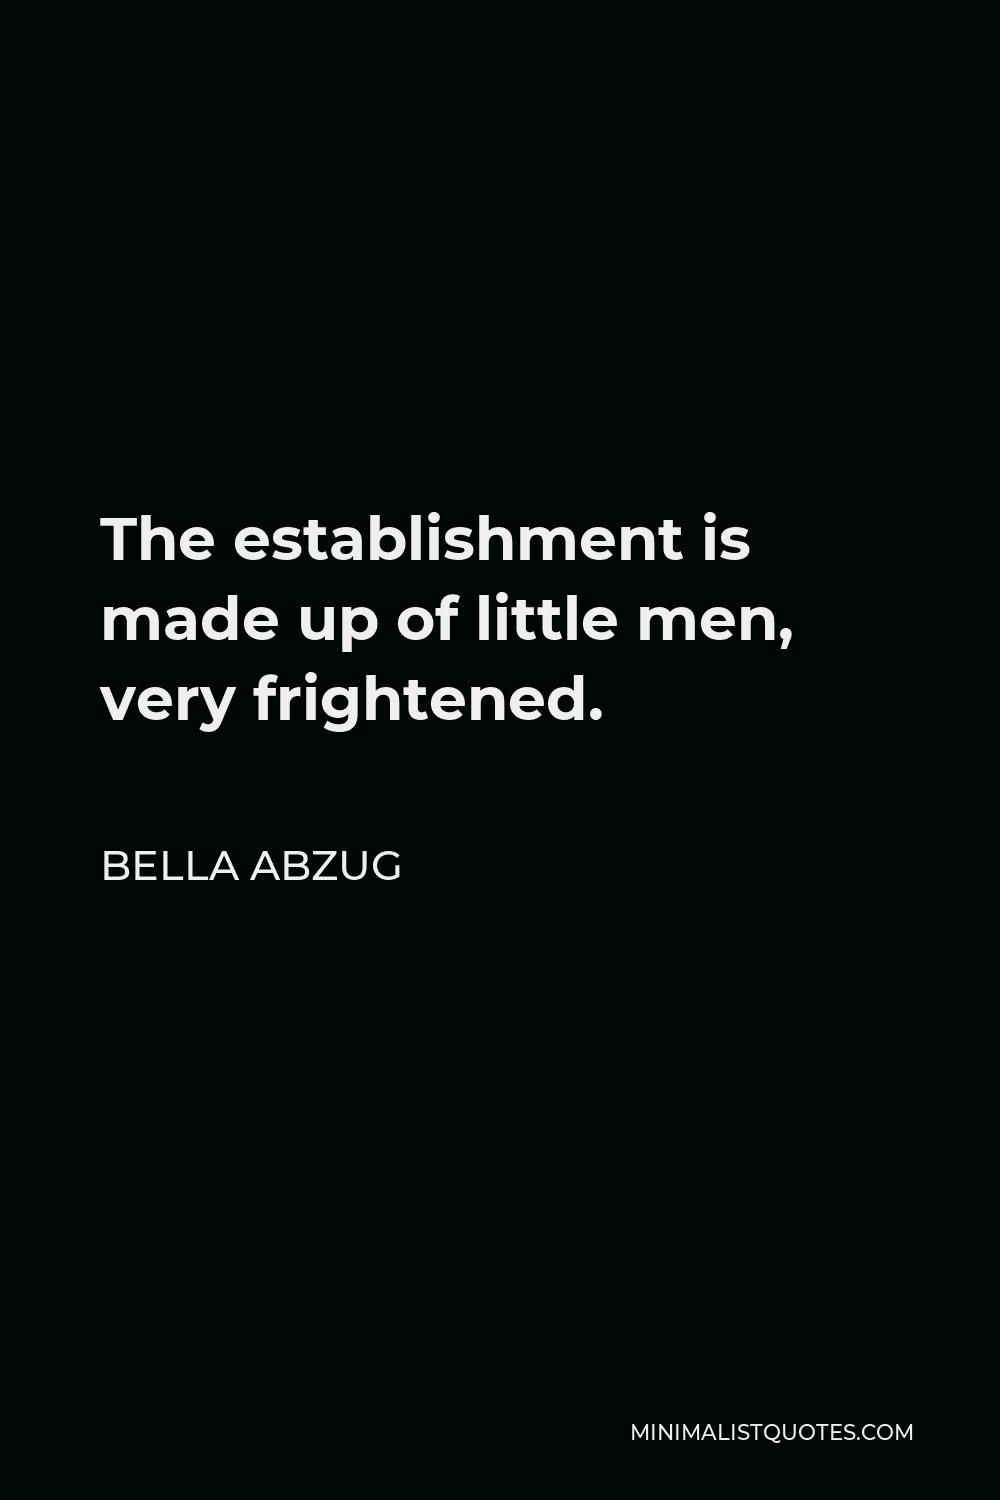 Bella Abzug Quote - The establishment is made up of little men, very frightened.